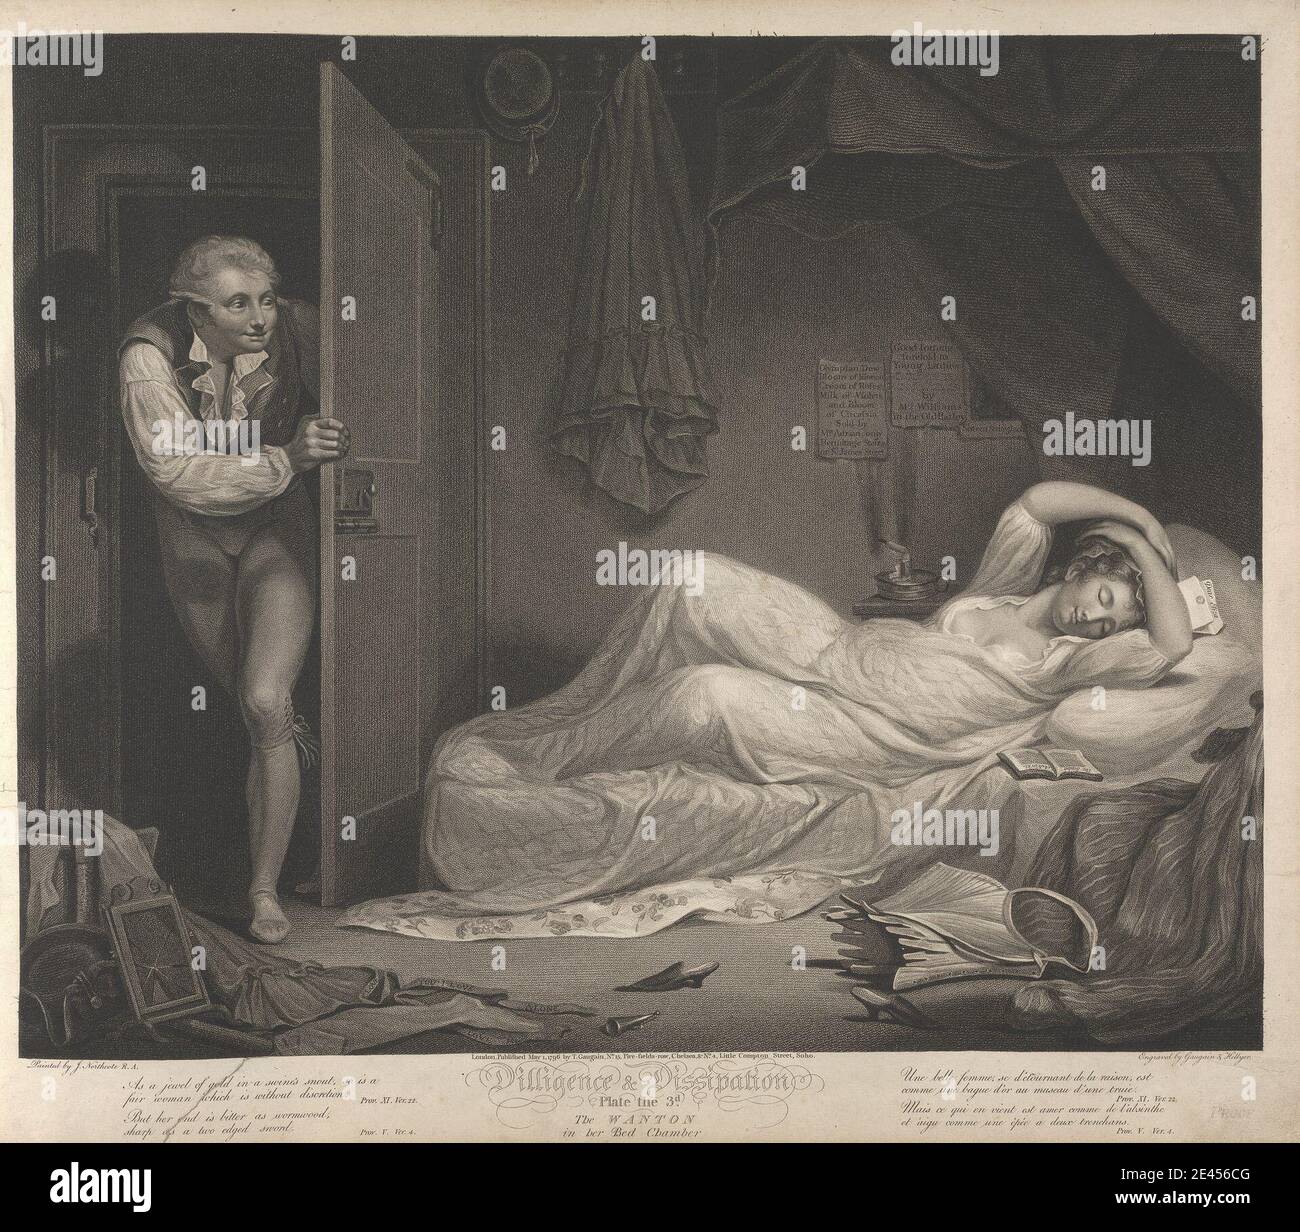 Print made by Thomas Gaugain, 1748â€“1812, French, Diligence and Dissipation: The Wanton in her Bed Chamber (Plate 3), 1797. Stipple engraving, open letter proofs.   bedroom , corset , literary theme , nightgown , sleeping Stock Photo